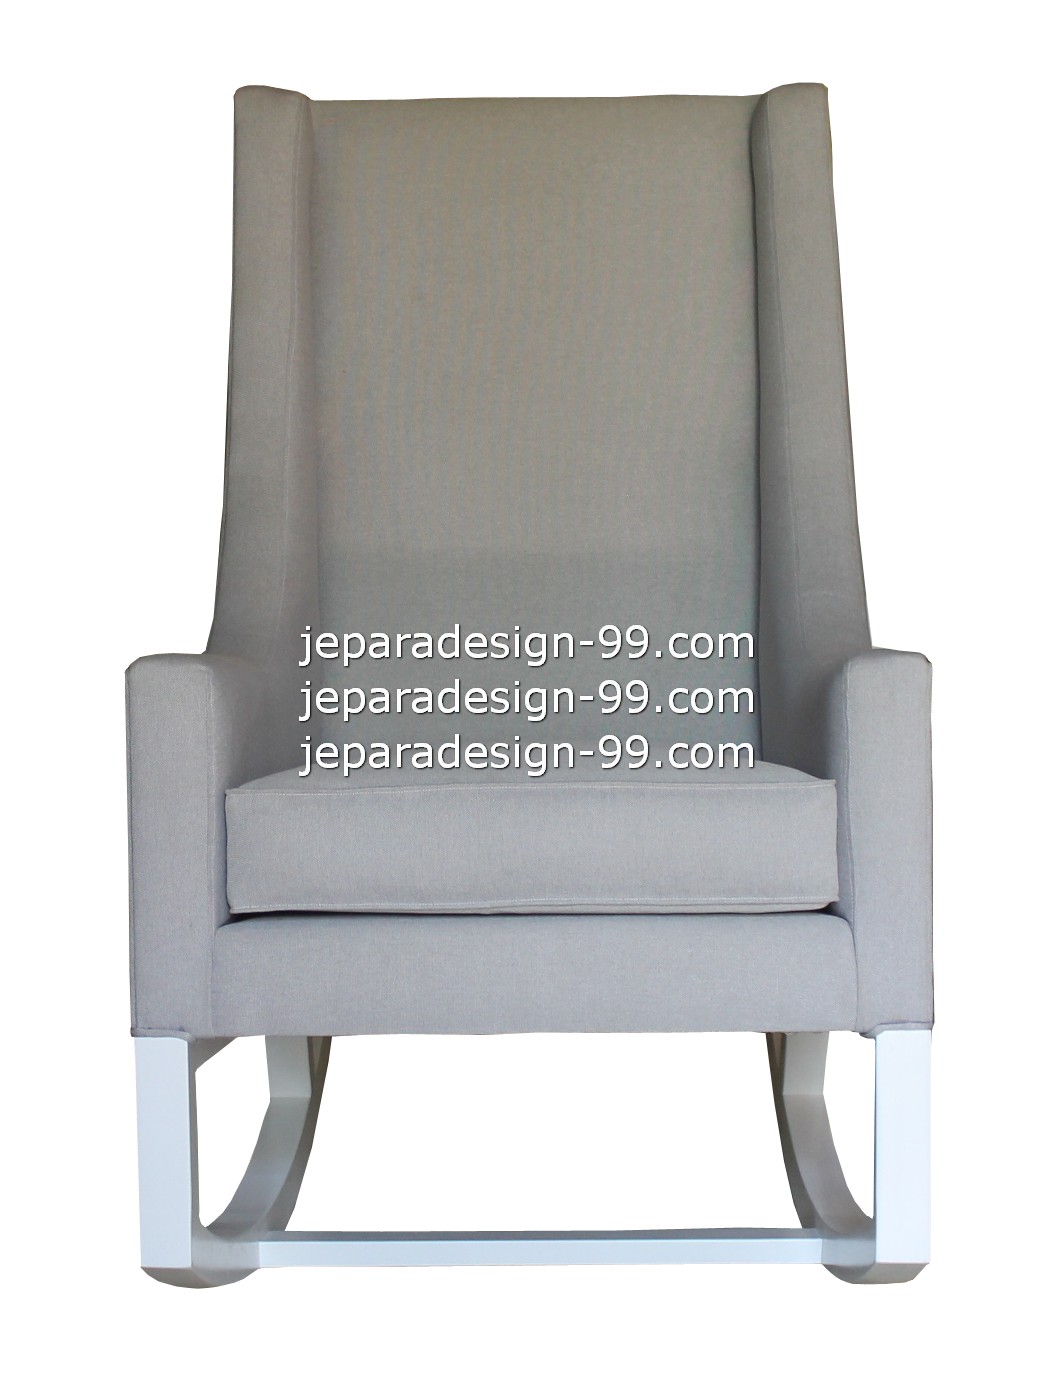 classic style chair